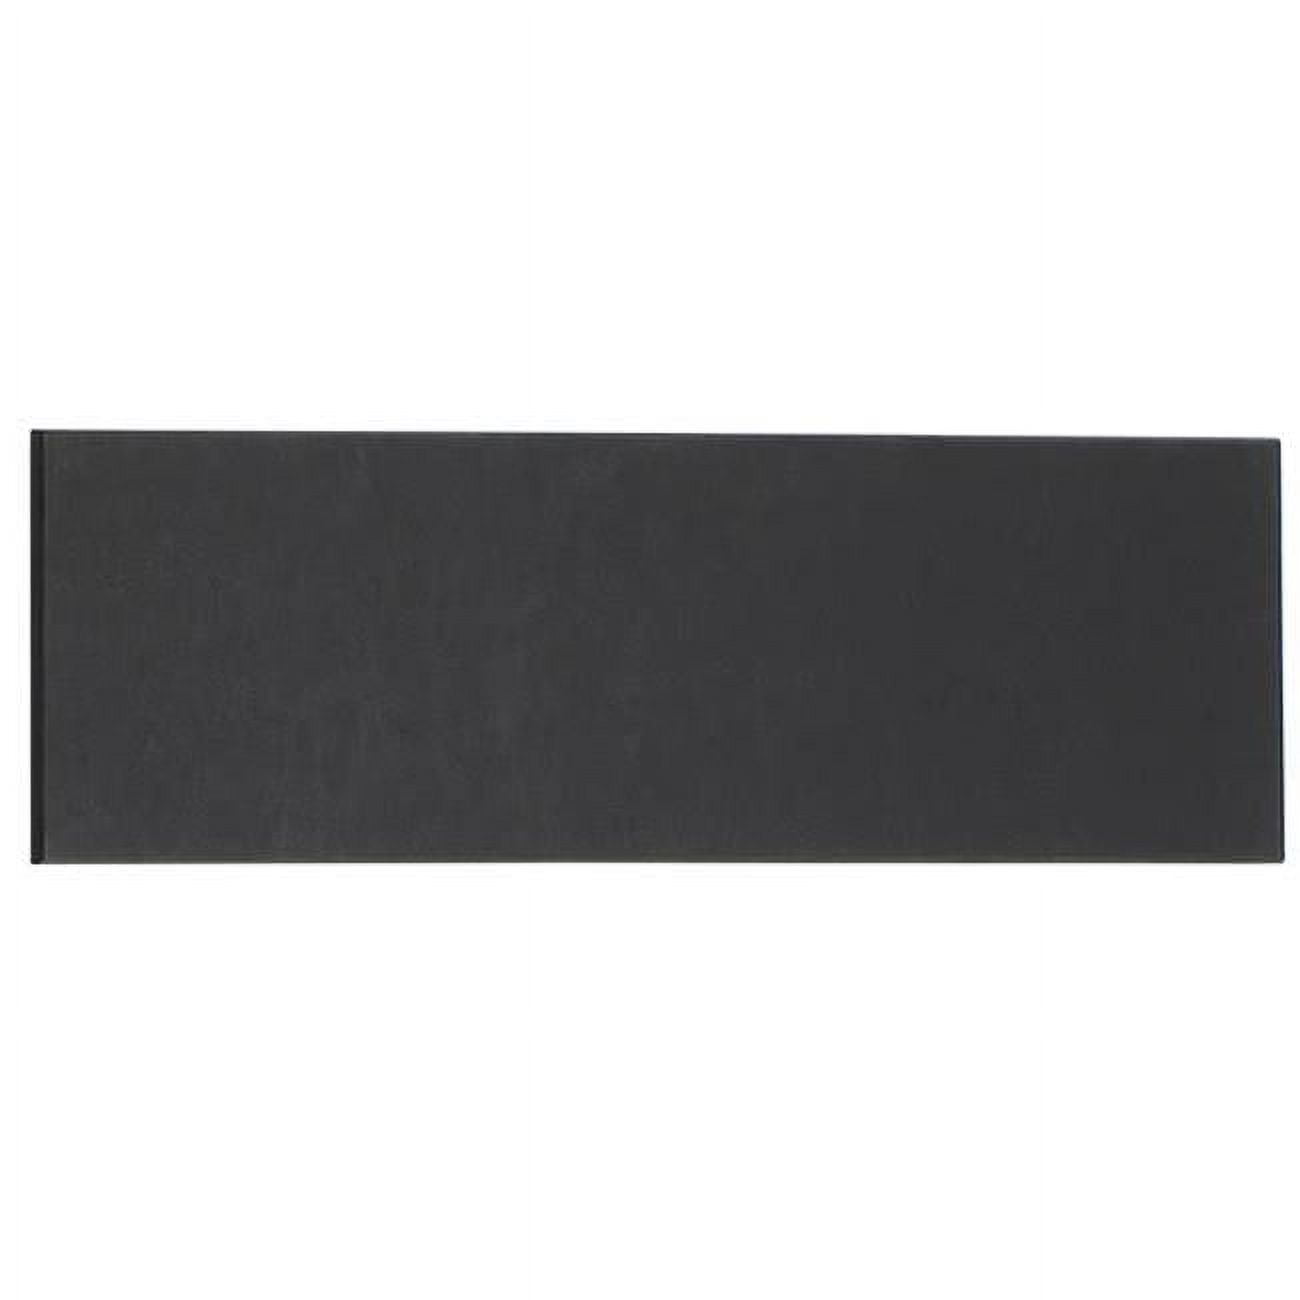 Picture of Cal Mil 1530-616-13 Black Rectangular Flat Bread Serving & Display Board - 15.875 x 6 x .25 in.